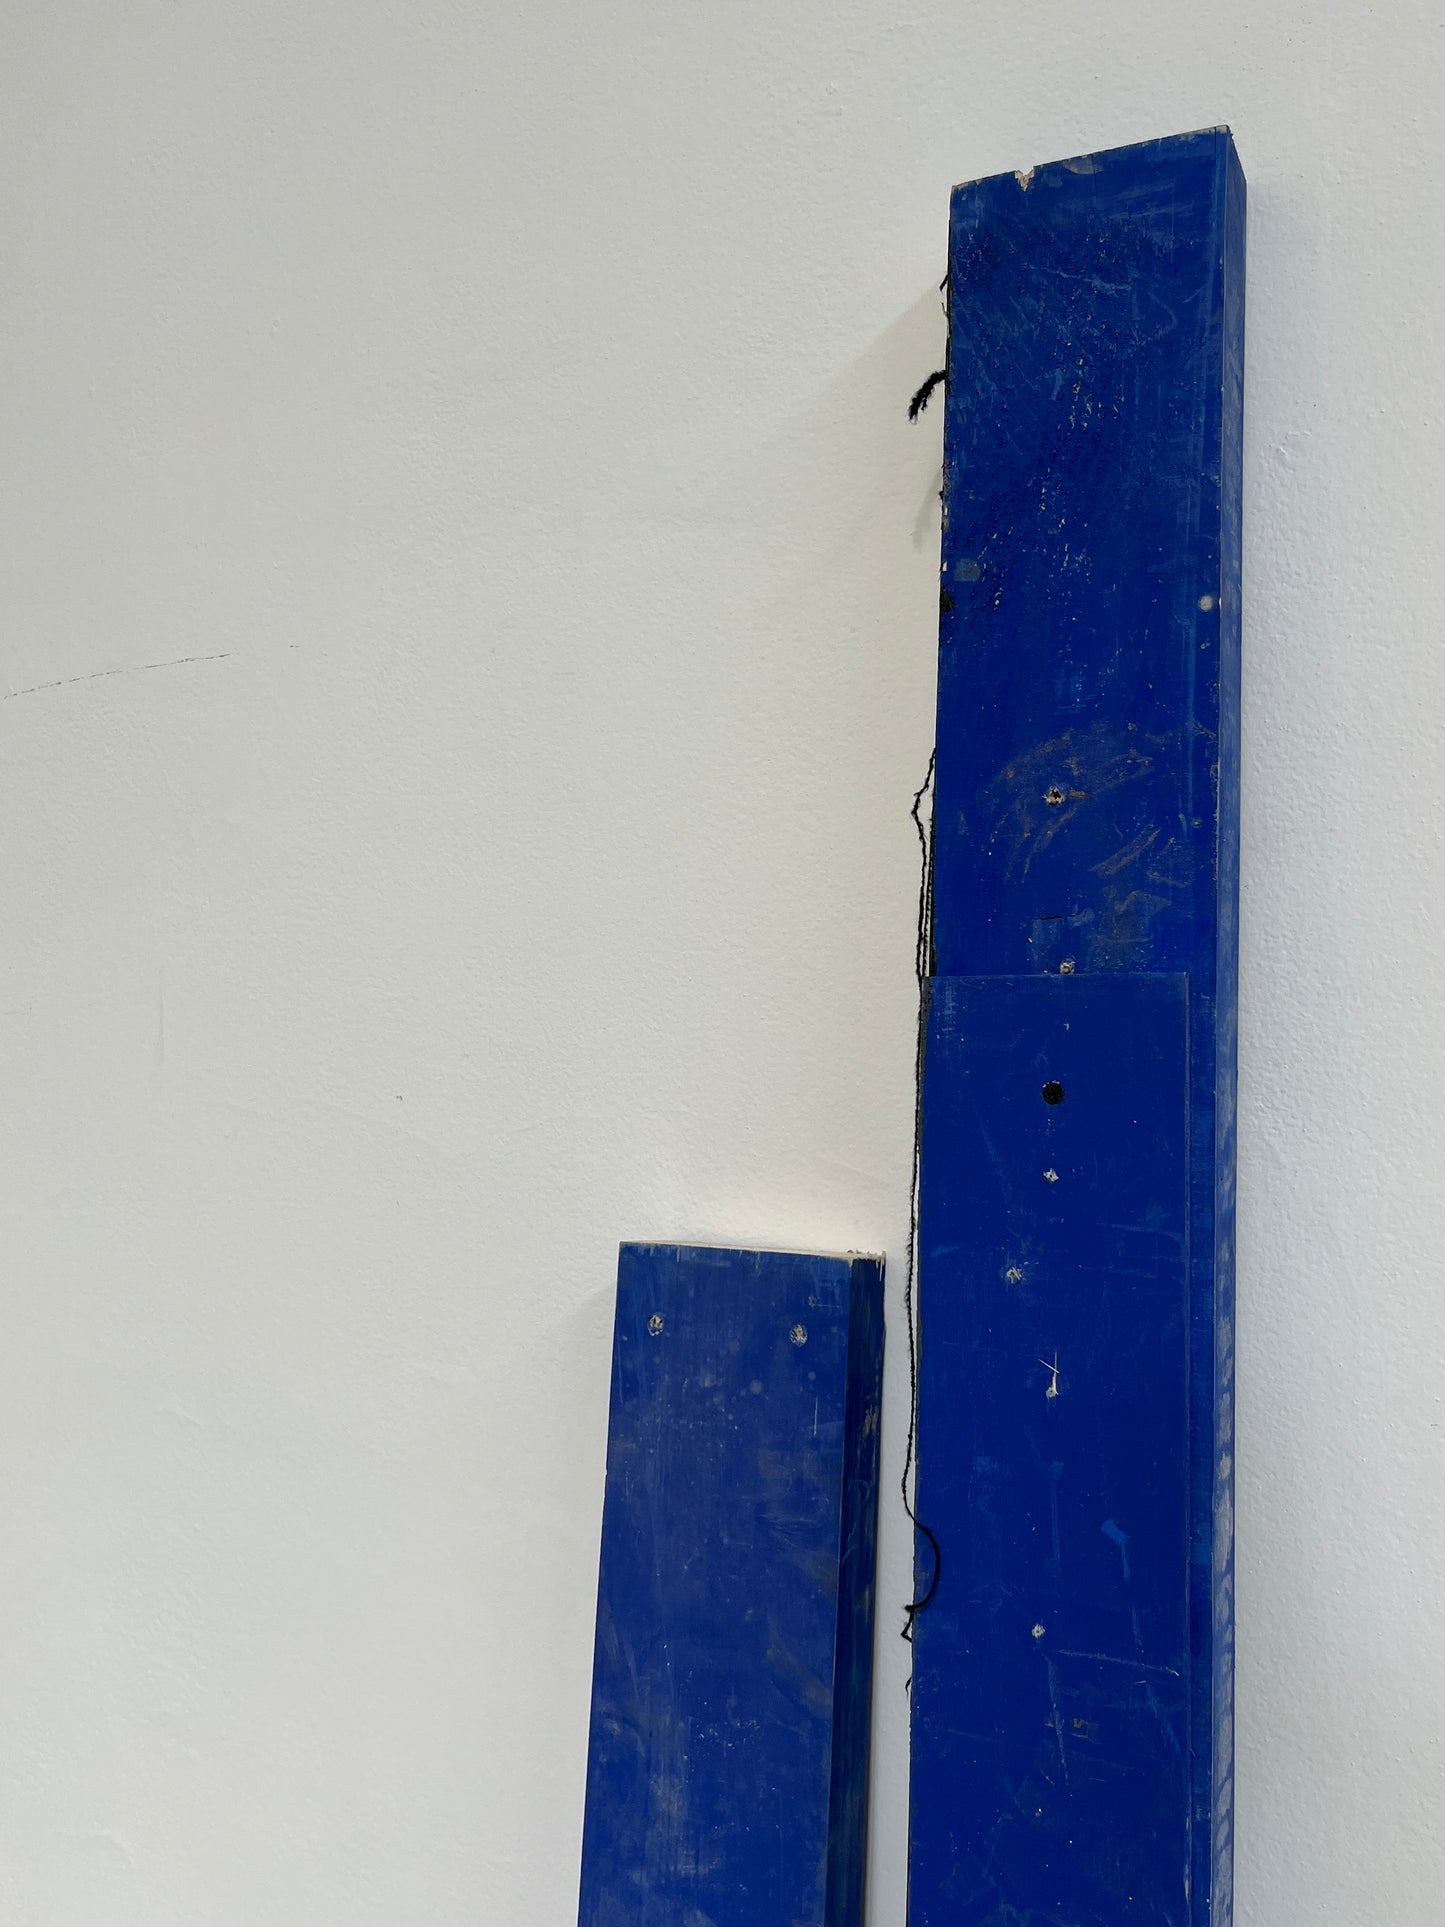 USED UP | Swiss Pavilion | Blue Wooden Beams, 2.23.9